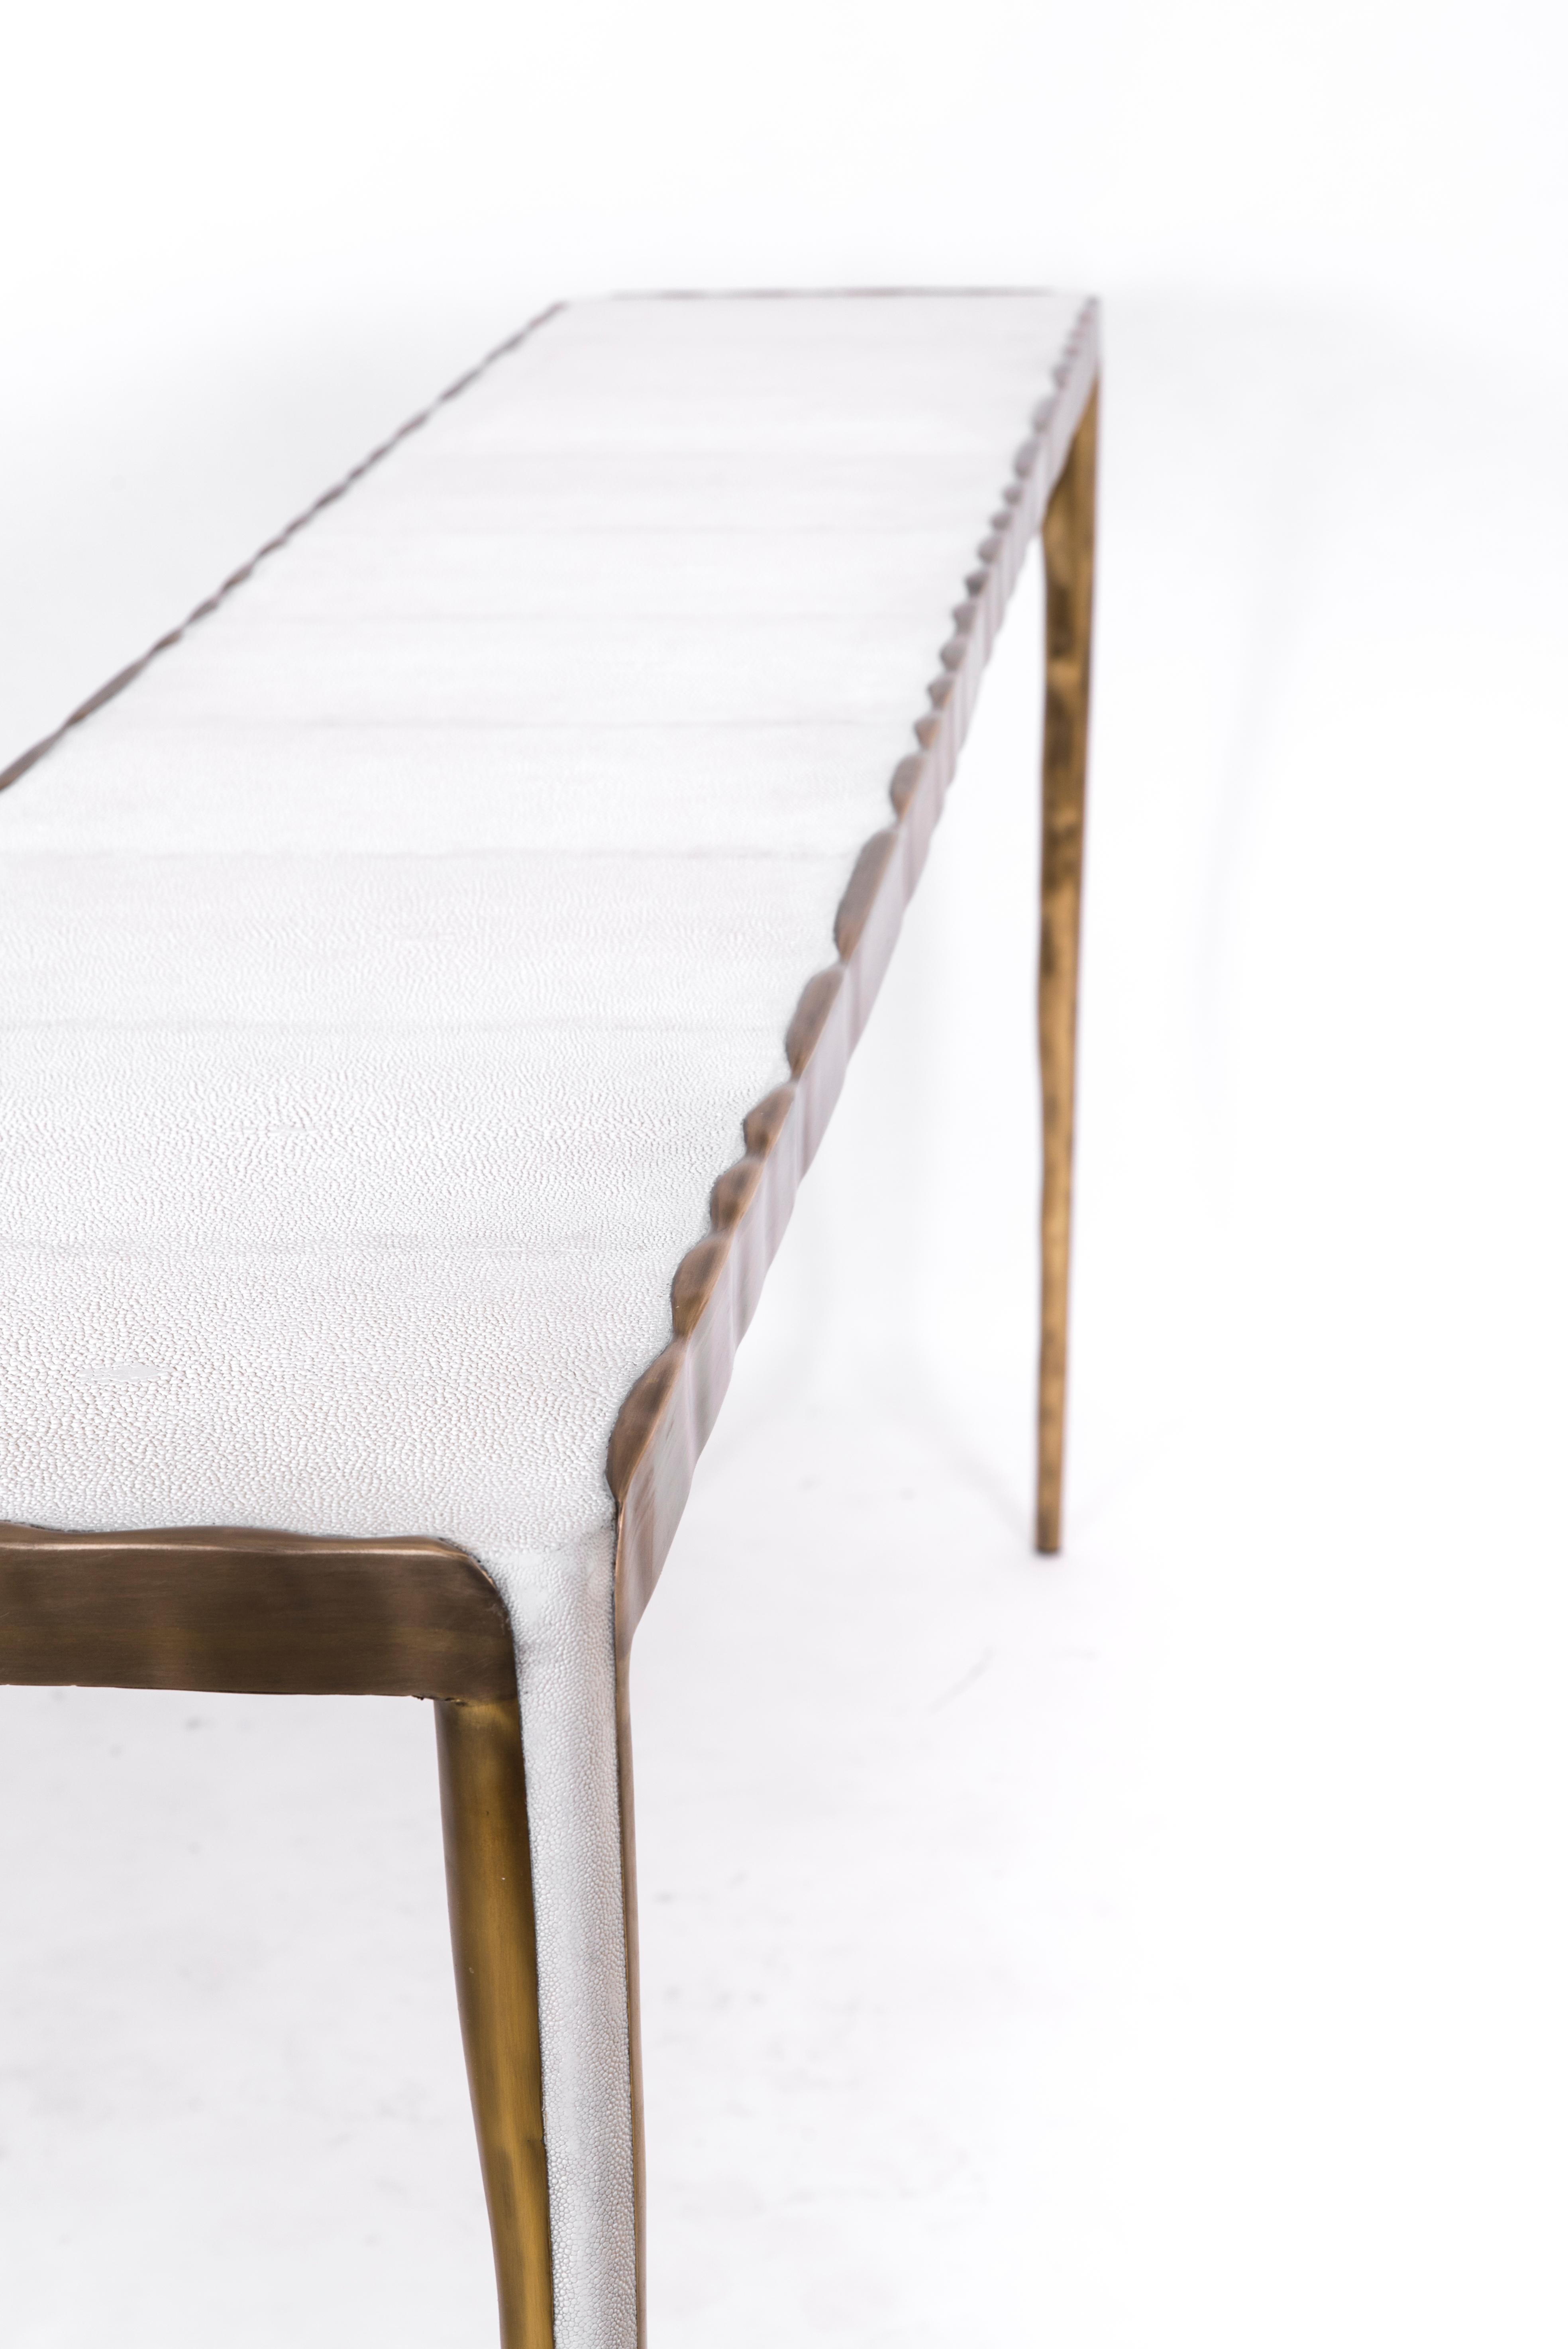 shagreen console tables